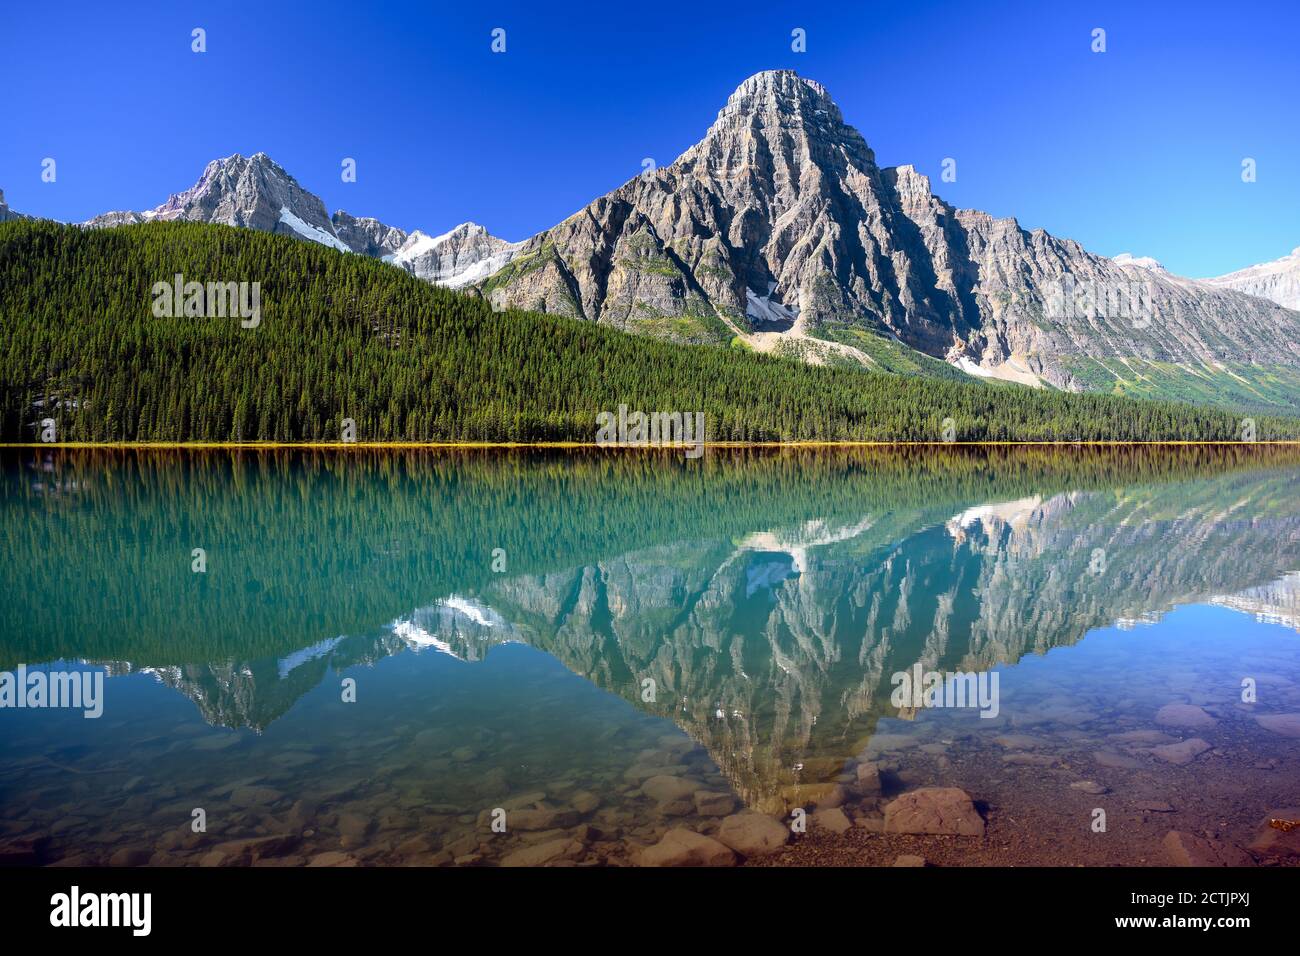 The scenic Waterfowl Lakes on the Icefields Parkway in Banff National Park, Alberta, Canada Stock Photo